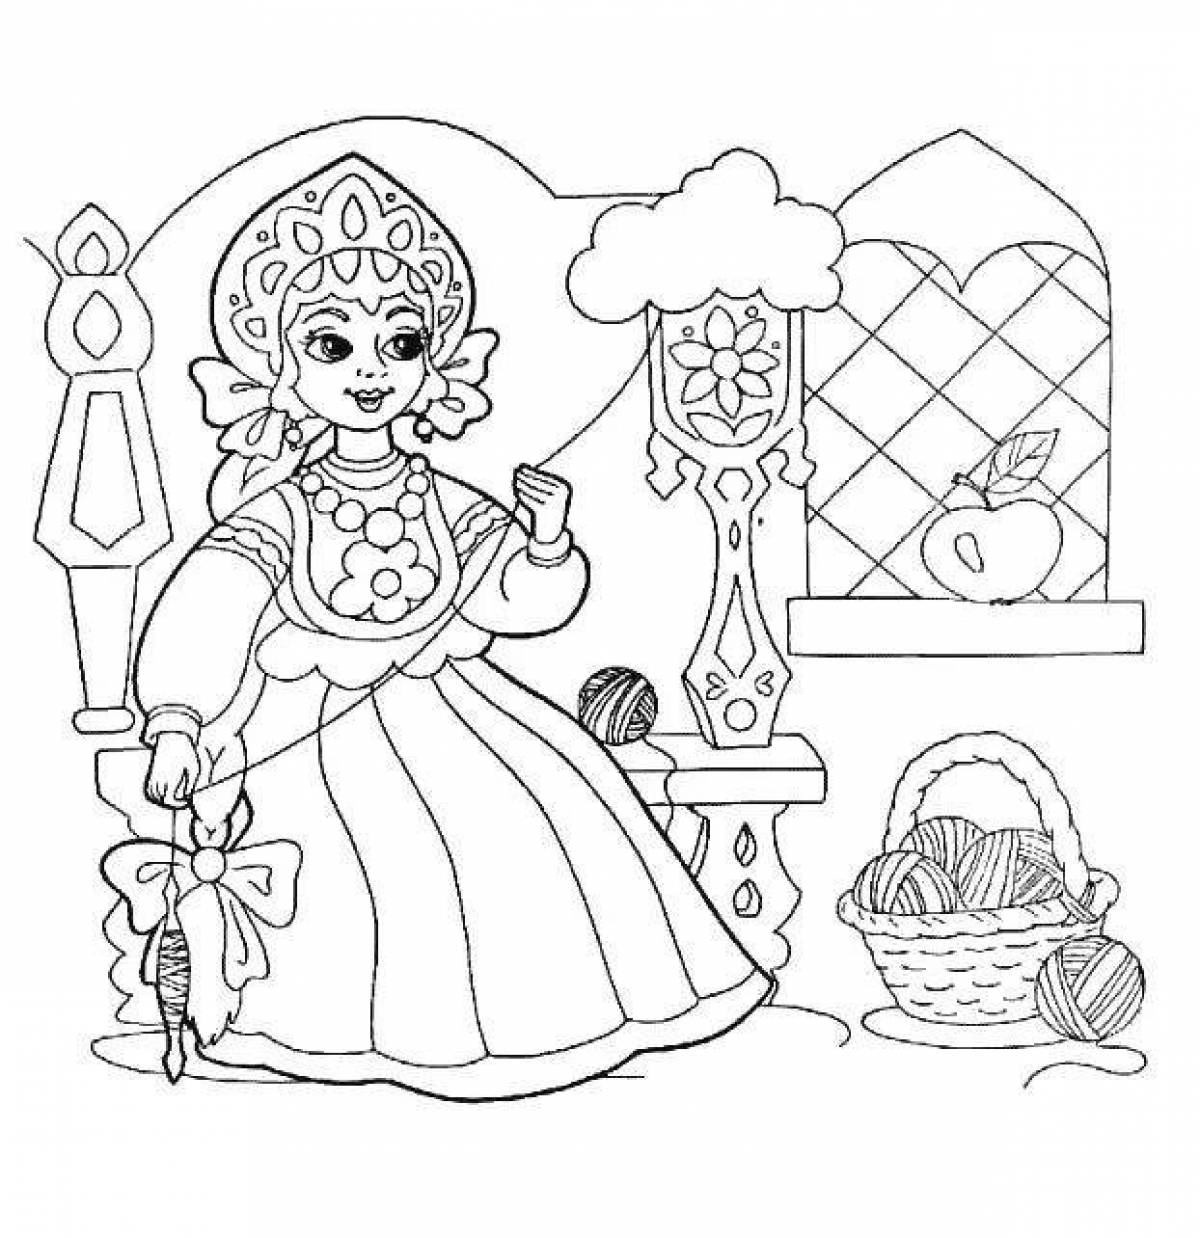 Amazing coloring book tale of the dead princess